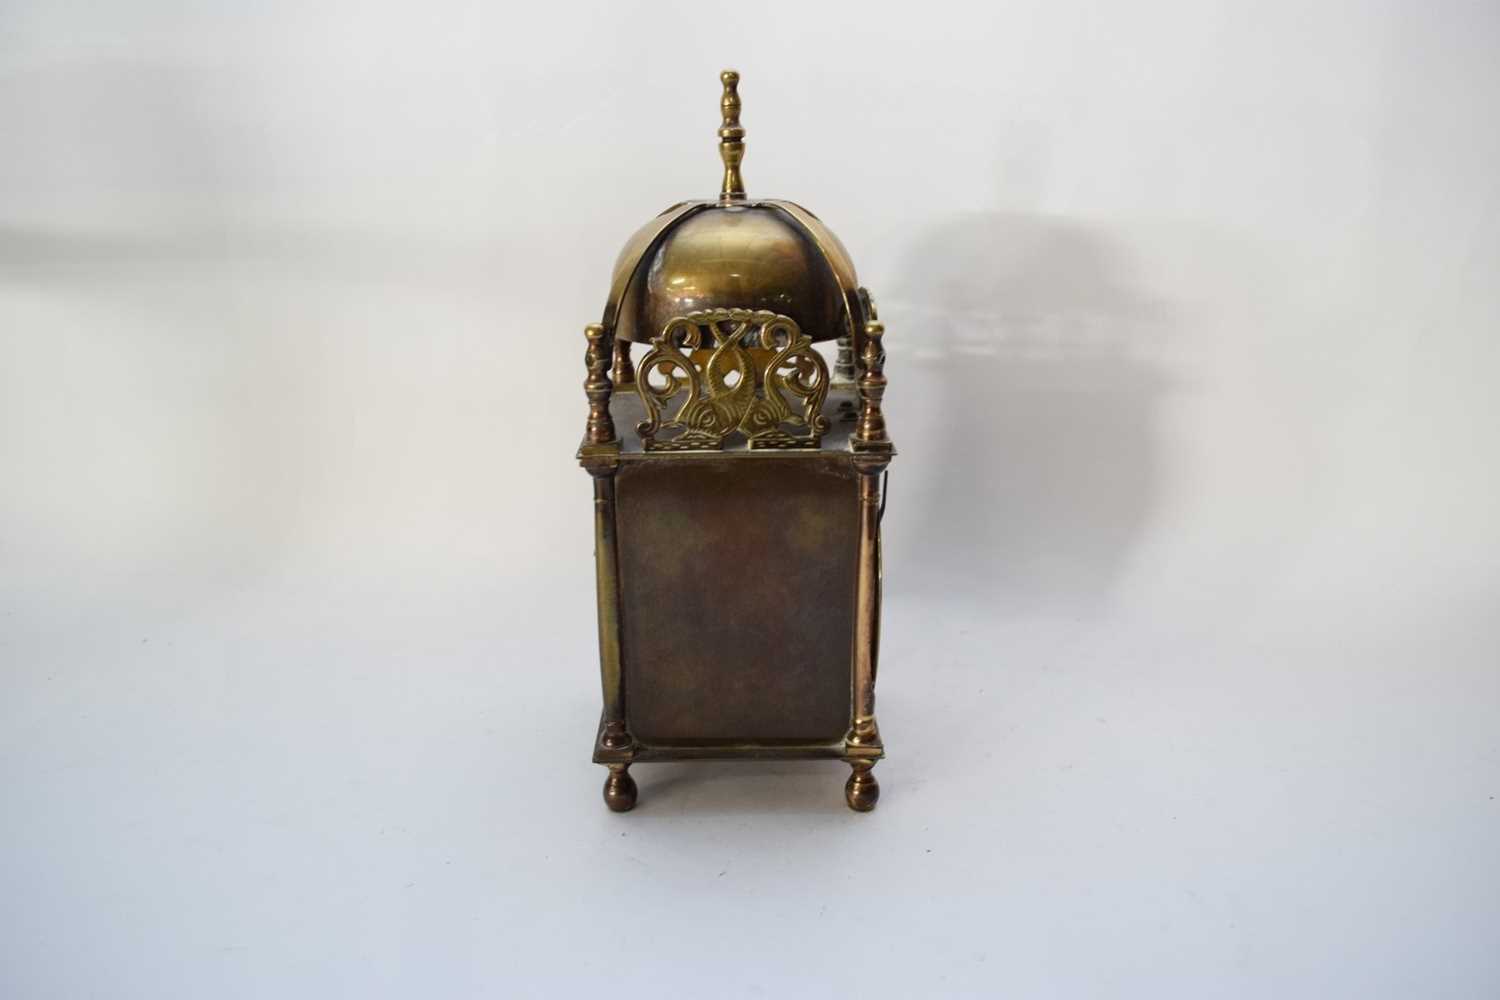 Lantern clock made by Smiths - Image 6 of 6